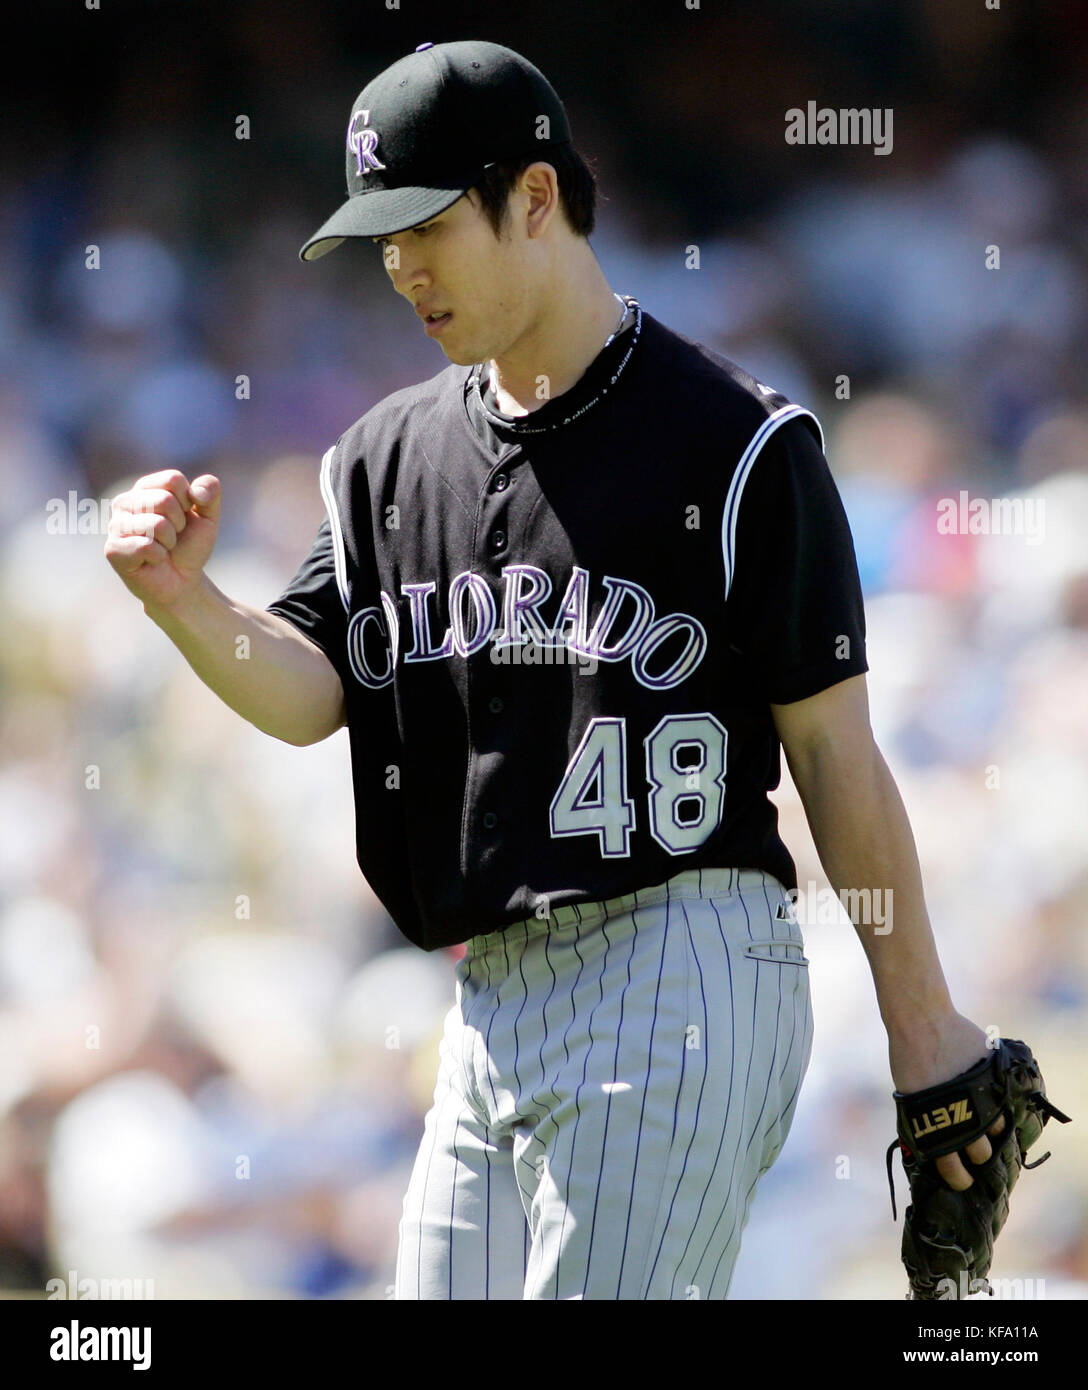 Colorado Rockies pitcher Byung-Hyun Kim, of South Korea, pumps his fist after getting Los Angeles Dodgers' Andre Ethier to ground into an inning-ending double play in the fifth inning of a baseball game in Los Angeles on Sunday, Sept. 3, 2006. Photo by Francis Specker Stock Photo